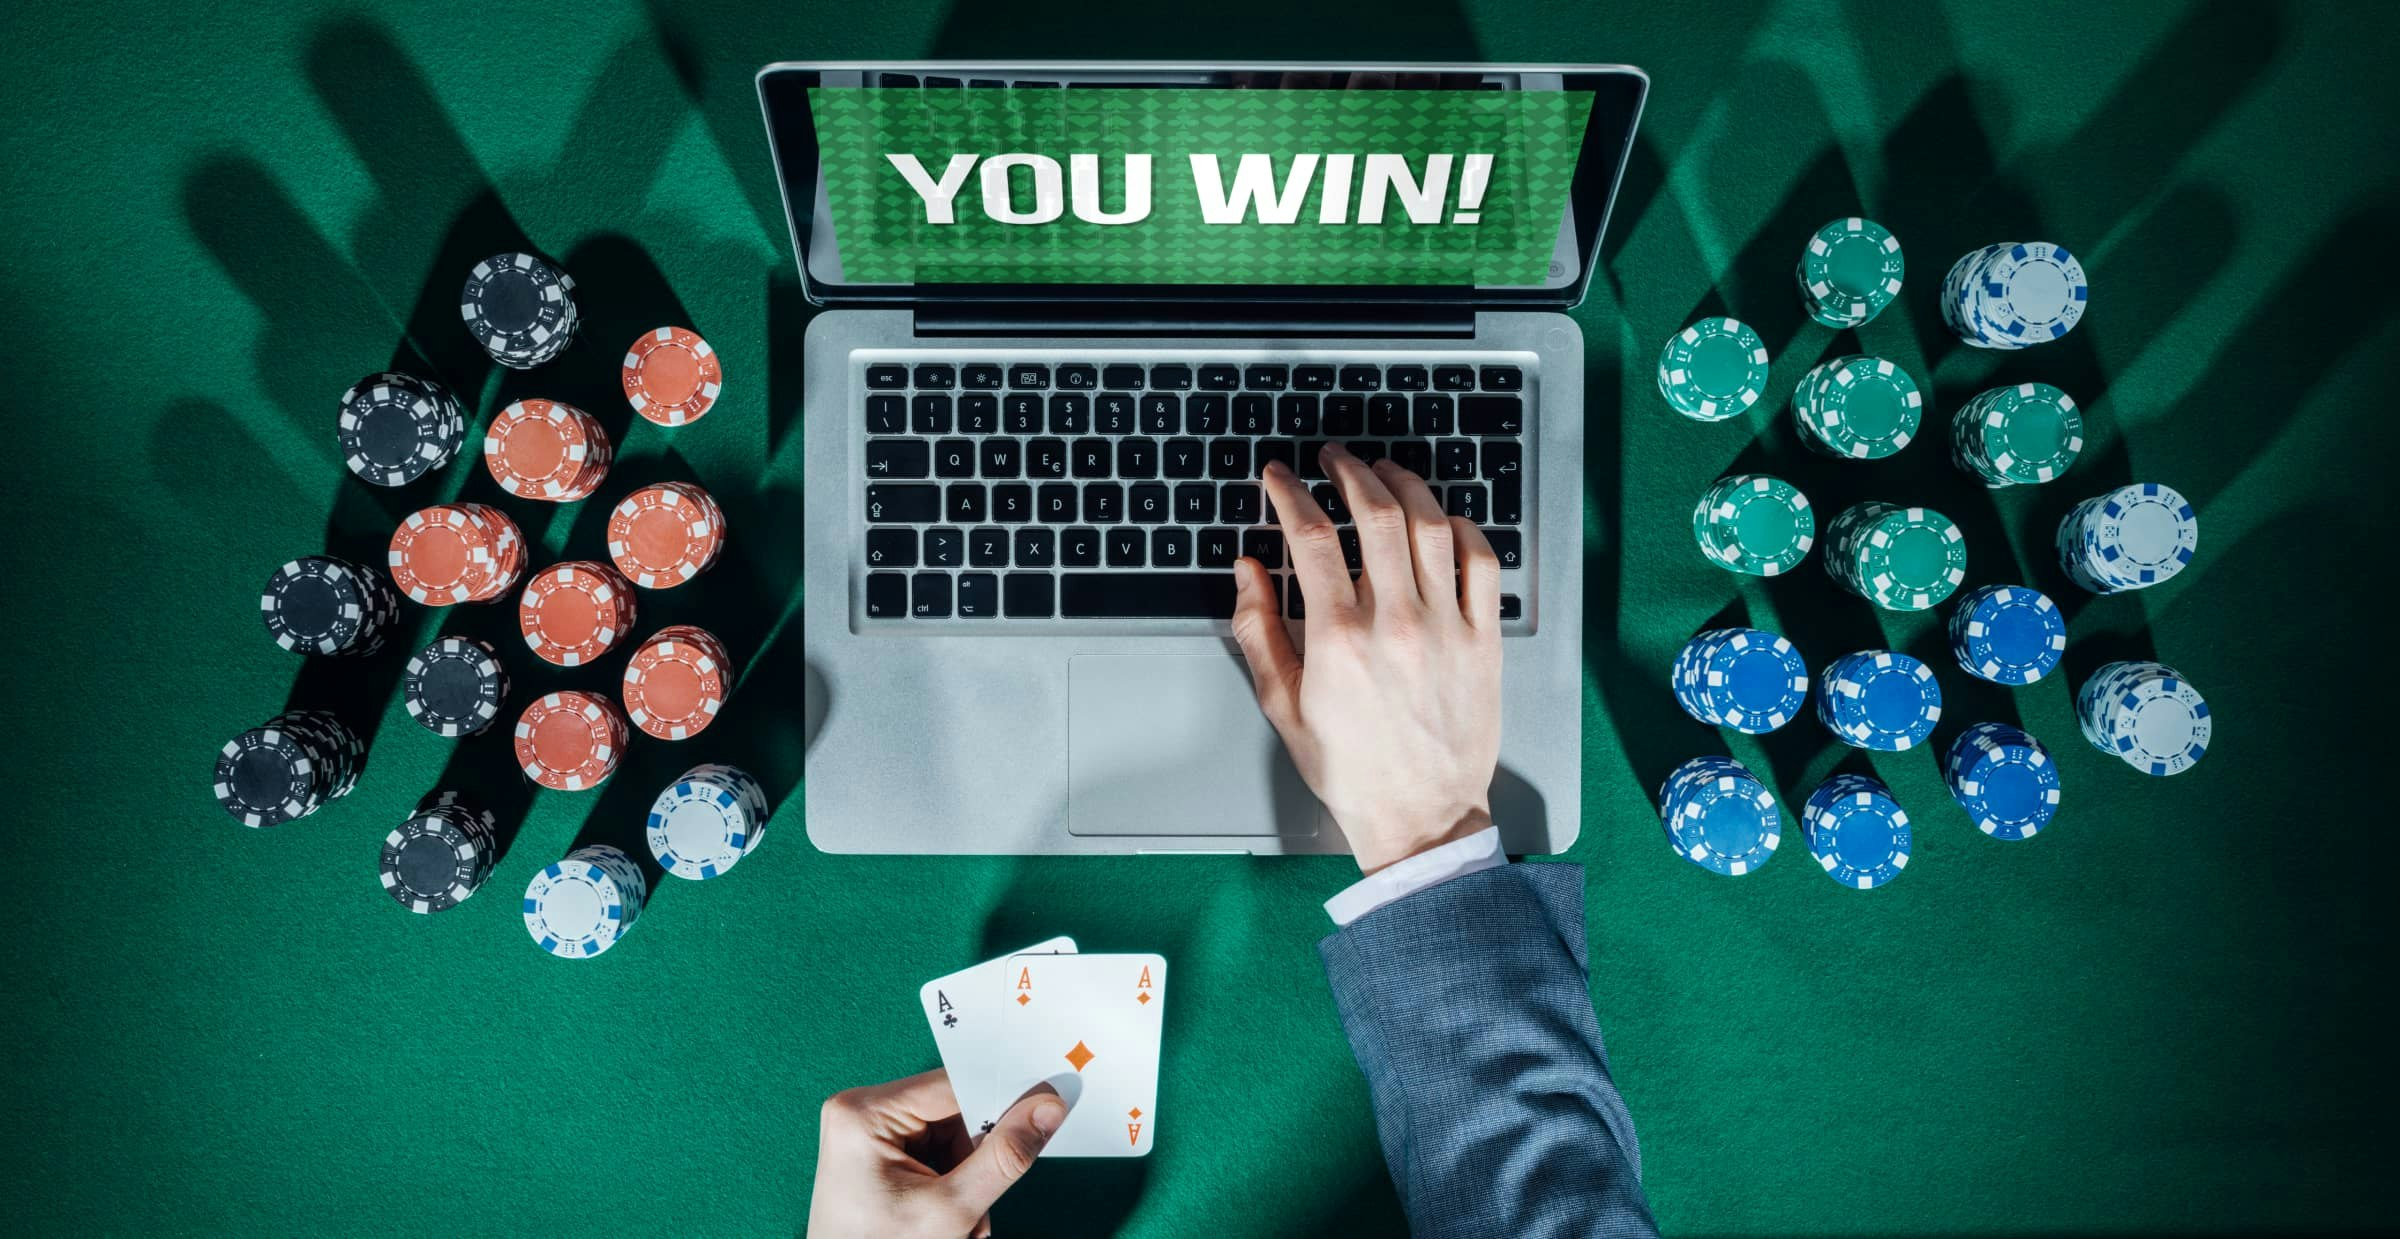 Casino tournaments: What you need to know